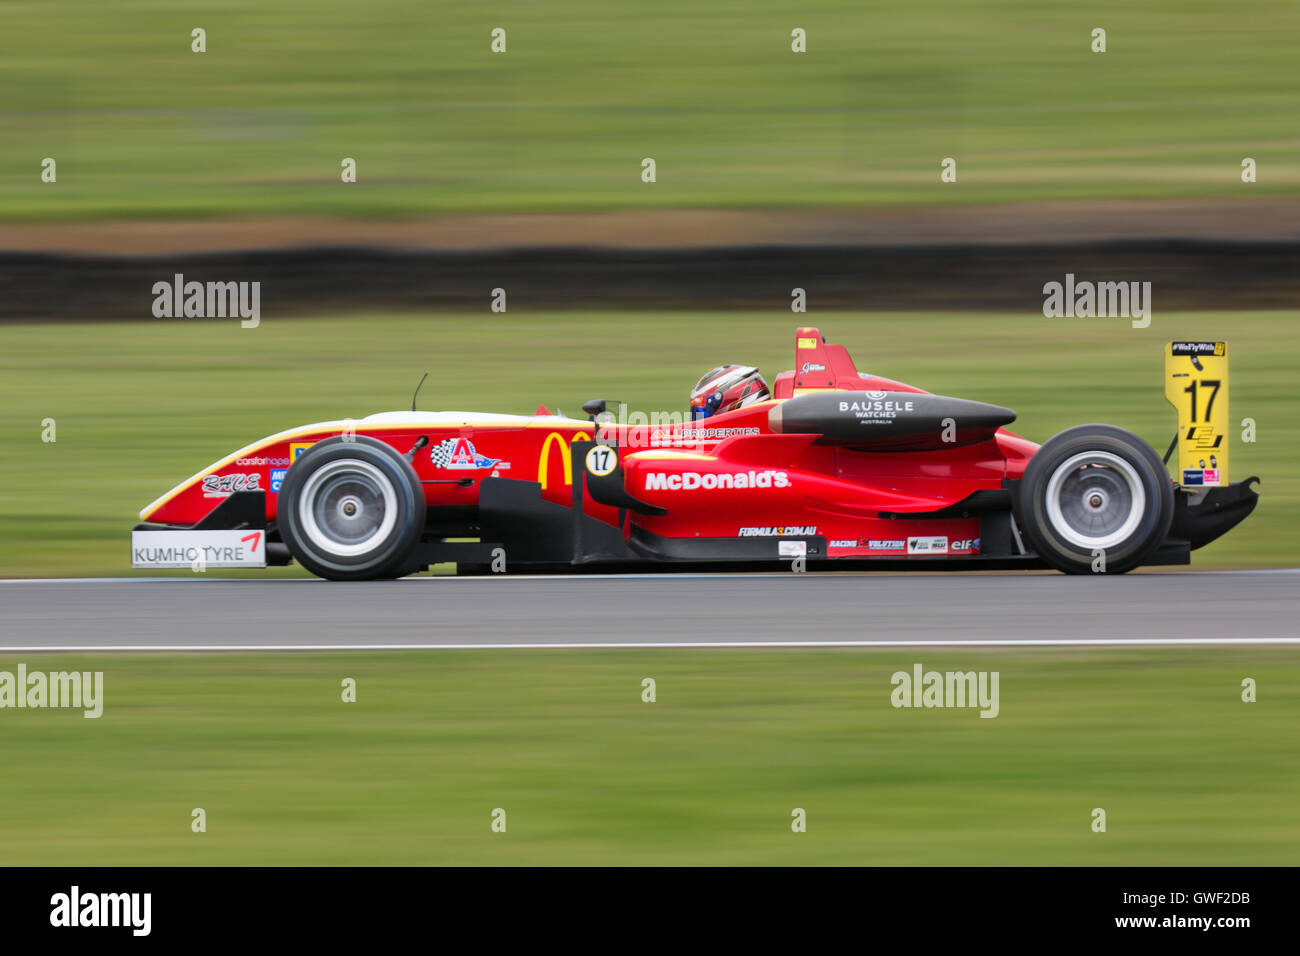 MELBOURNE/AUSTRALIA - SEPTEMBER 10, 2016: Christopher Anthony behind the wheel of the McDonalds Gilmour Racing Formula 3 car for Stock Photo